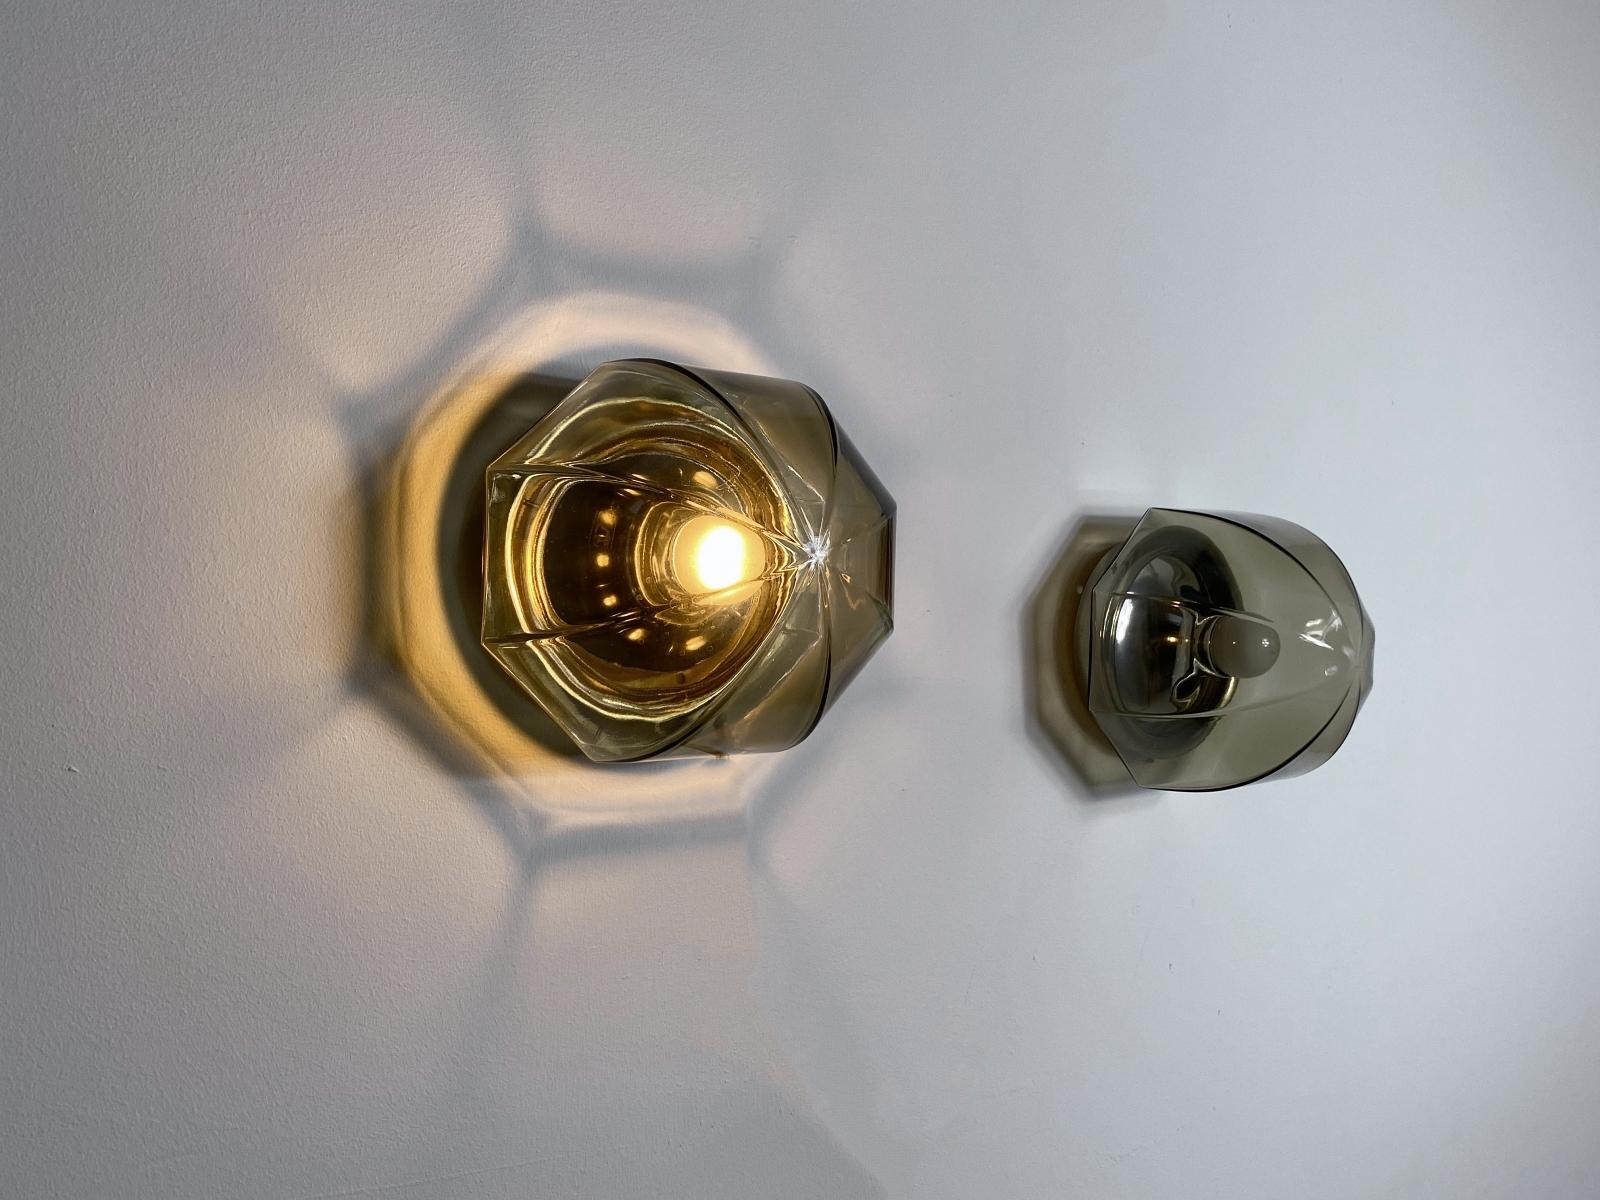 Blown Glass Hillebrand Chrome & Smoked Glass Sconce Flush Mount Lights, 1970s, Germany For Sale